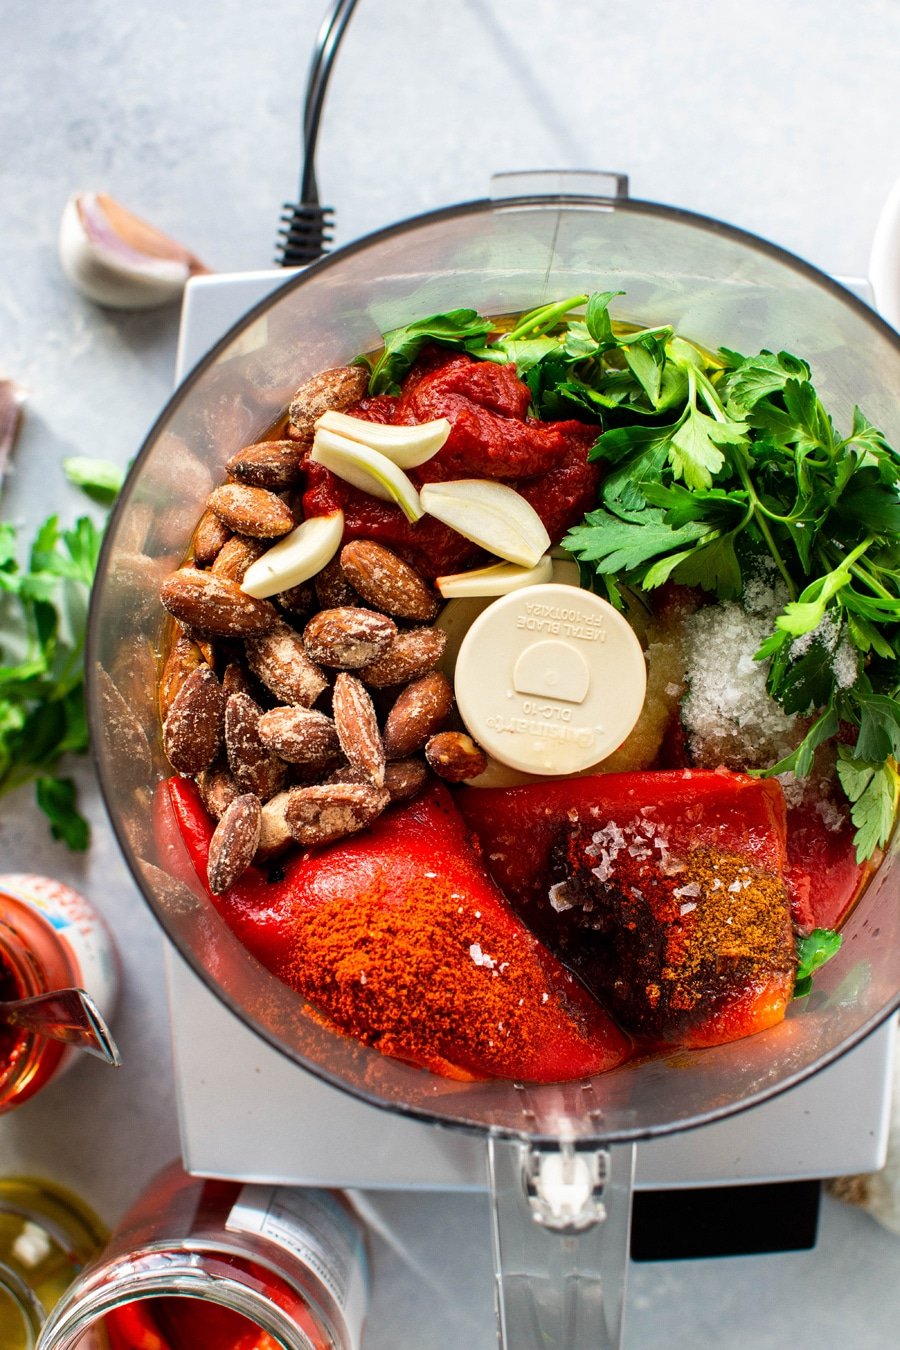 Overhead view of a food processor filled with all the ingredients for this fast and easy romesco sauce - roasted red peppers, almonds, garlic, parsley, spices, and salt.